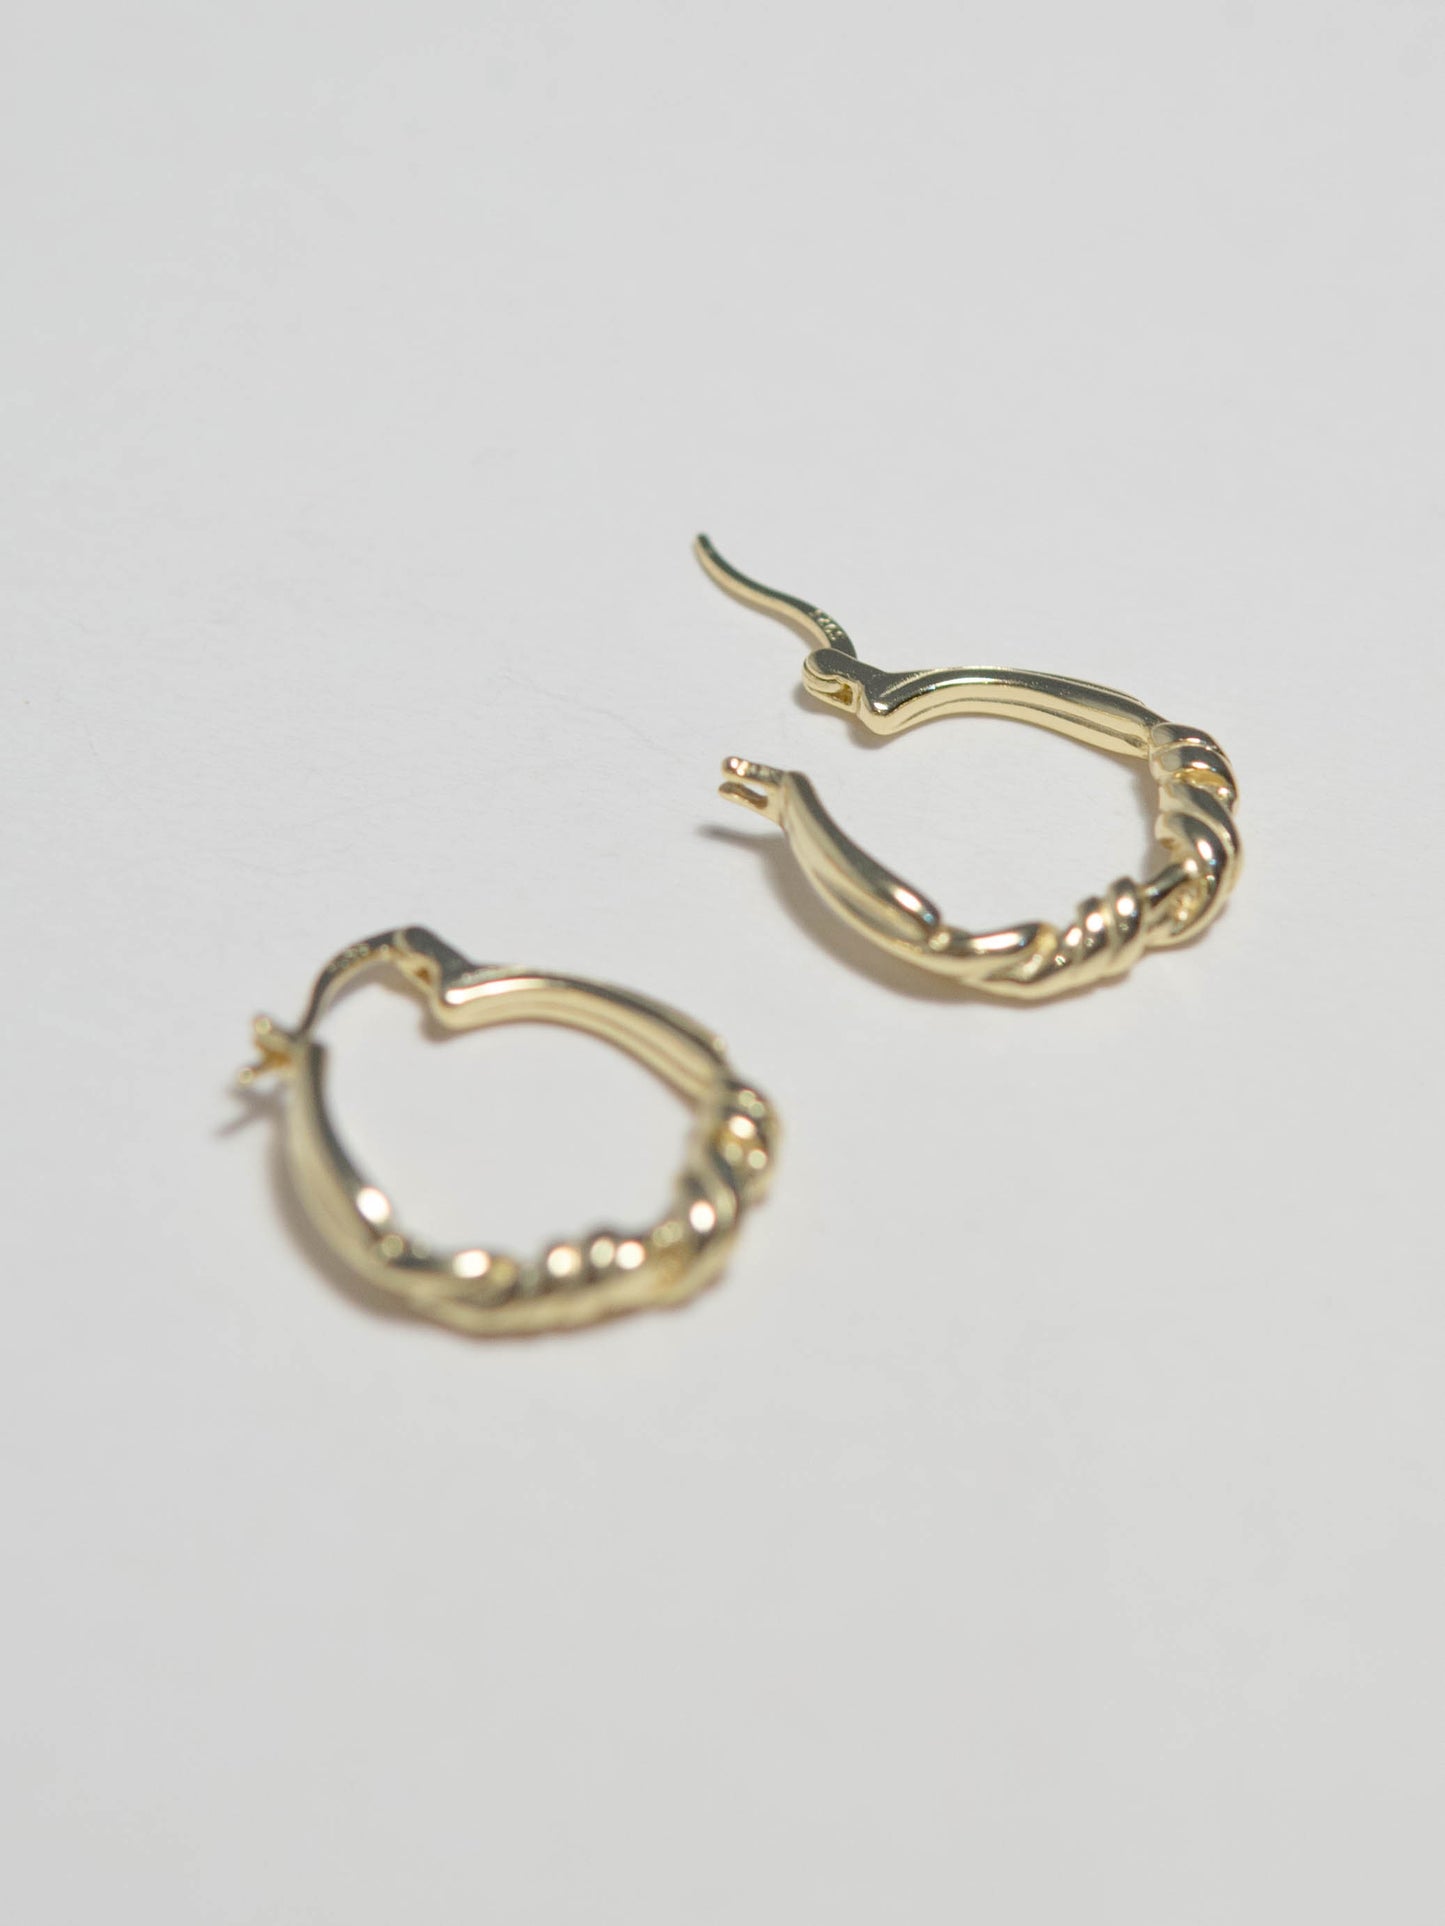 French style knotted earrings in Sterling Silver